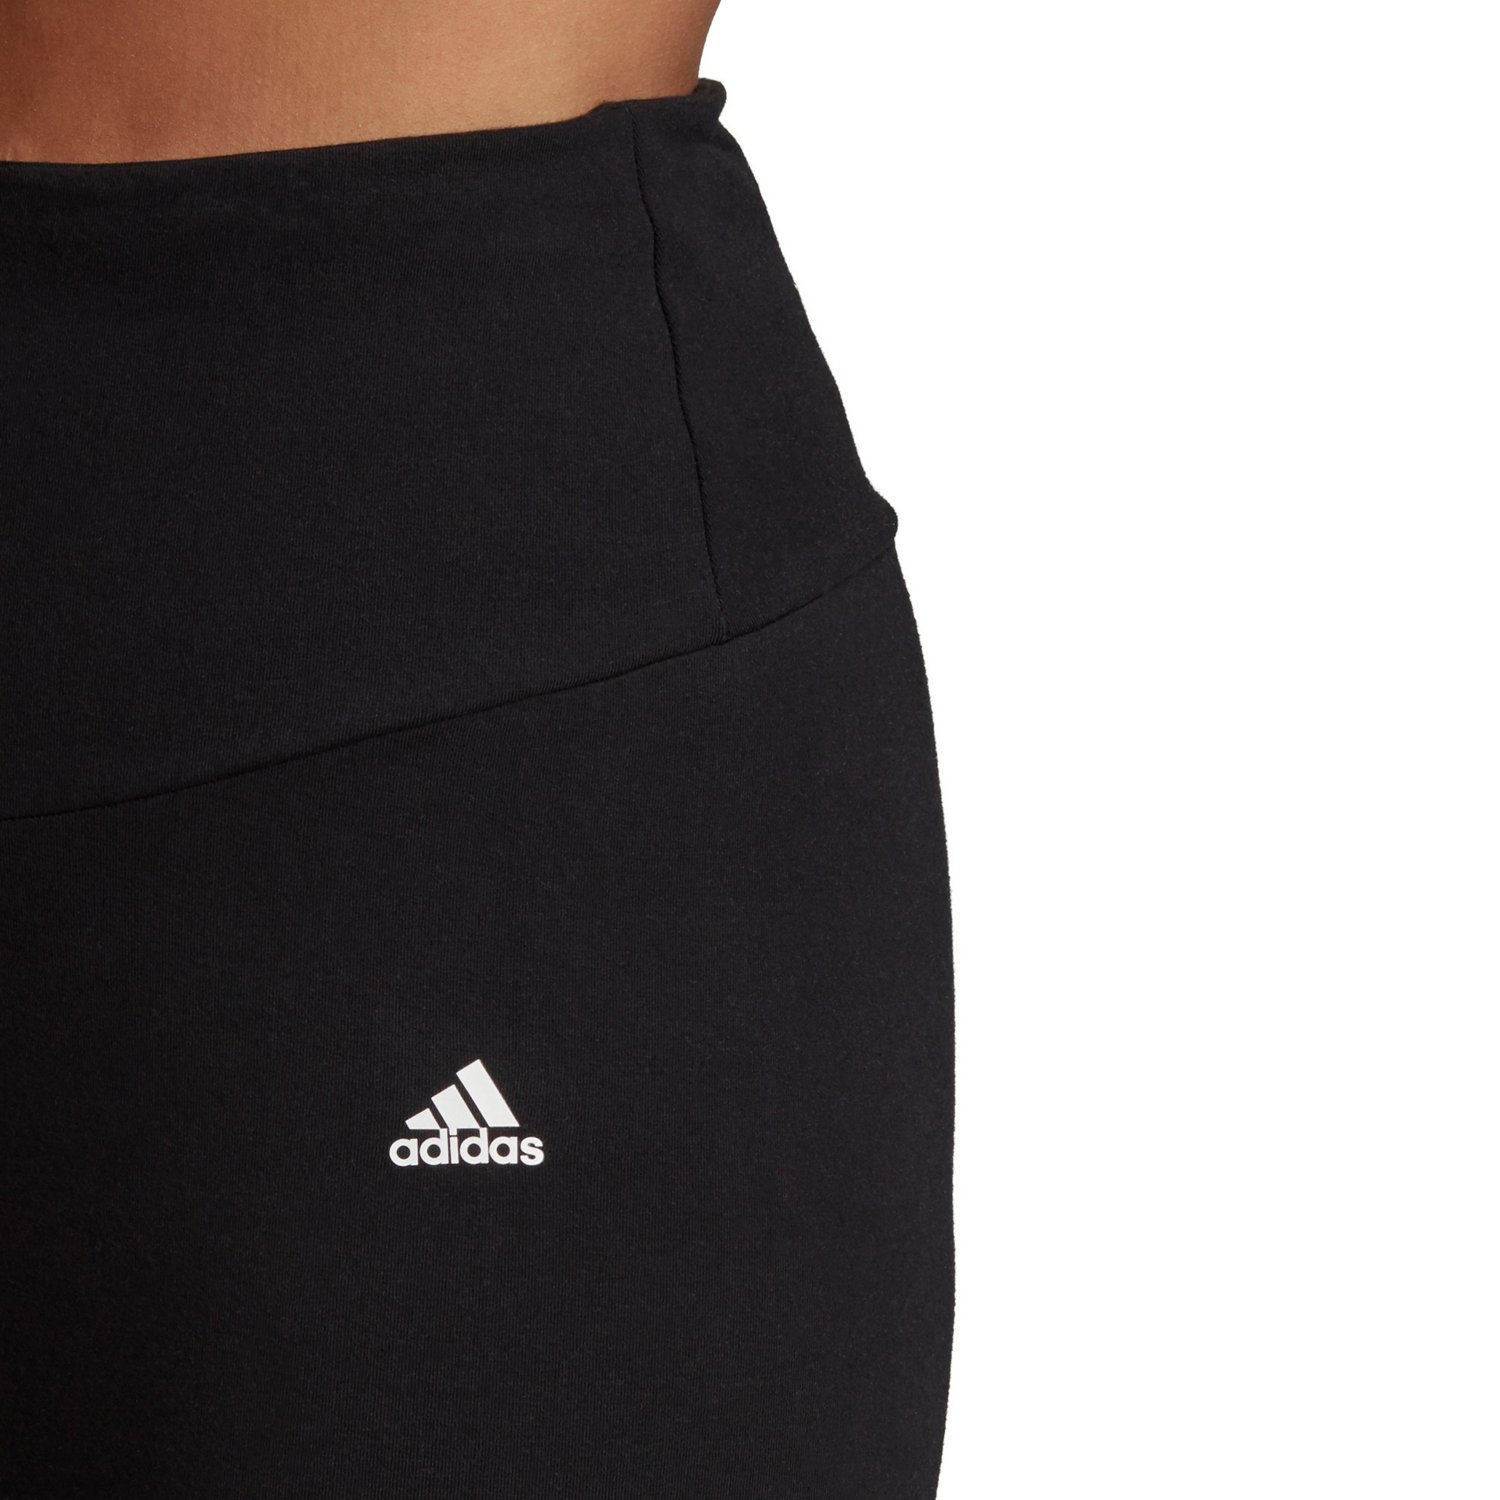 adidas Women's Linear Plus Leggings | Free Shipping at Academy